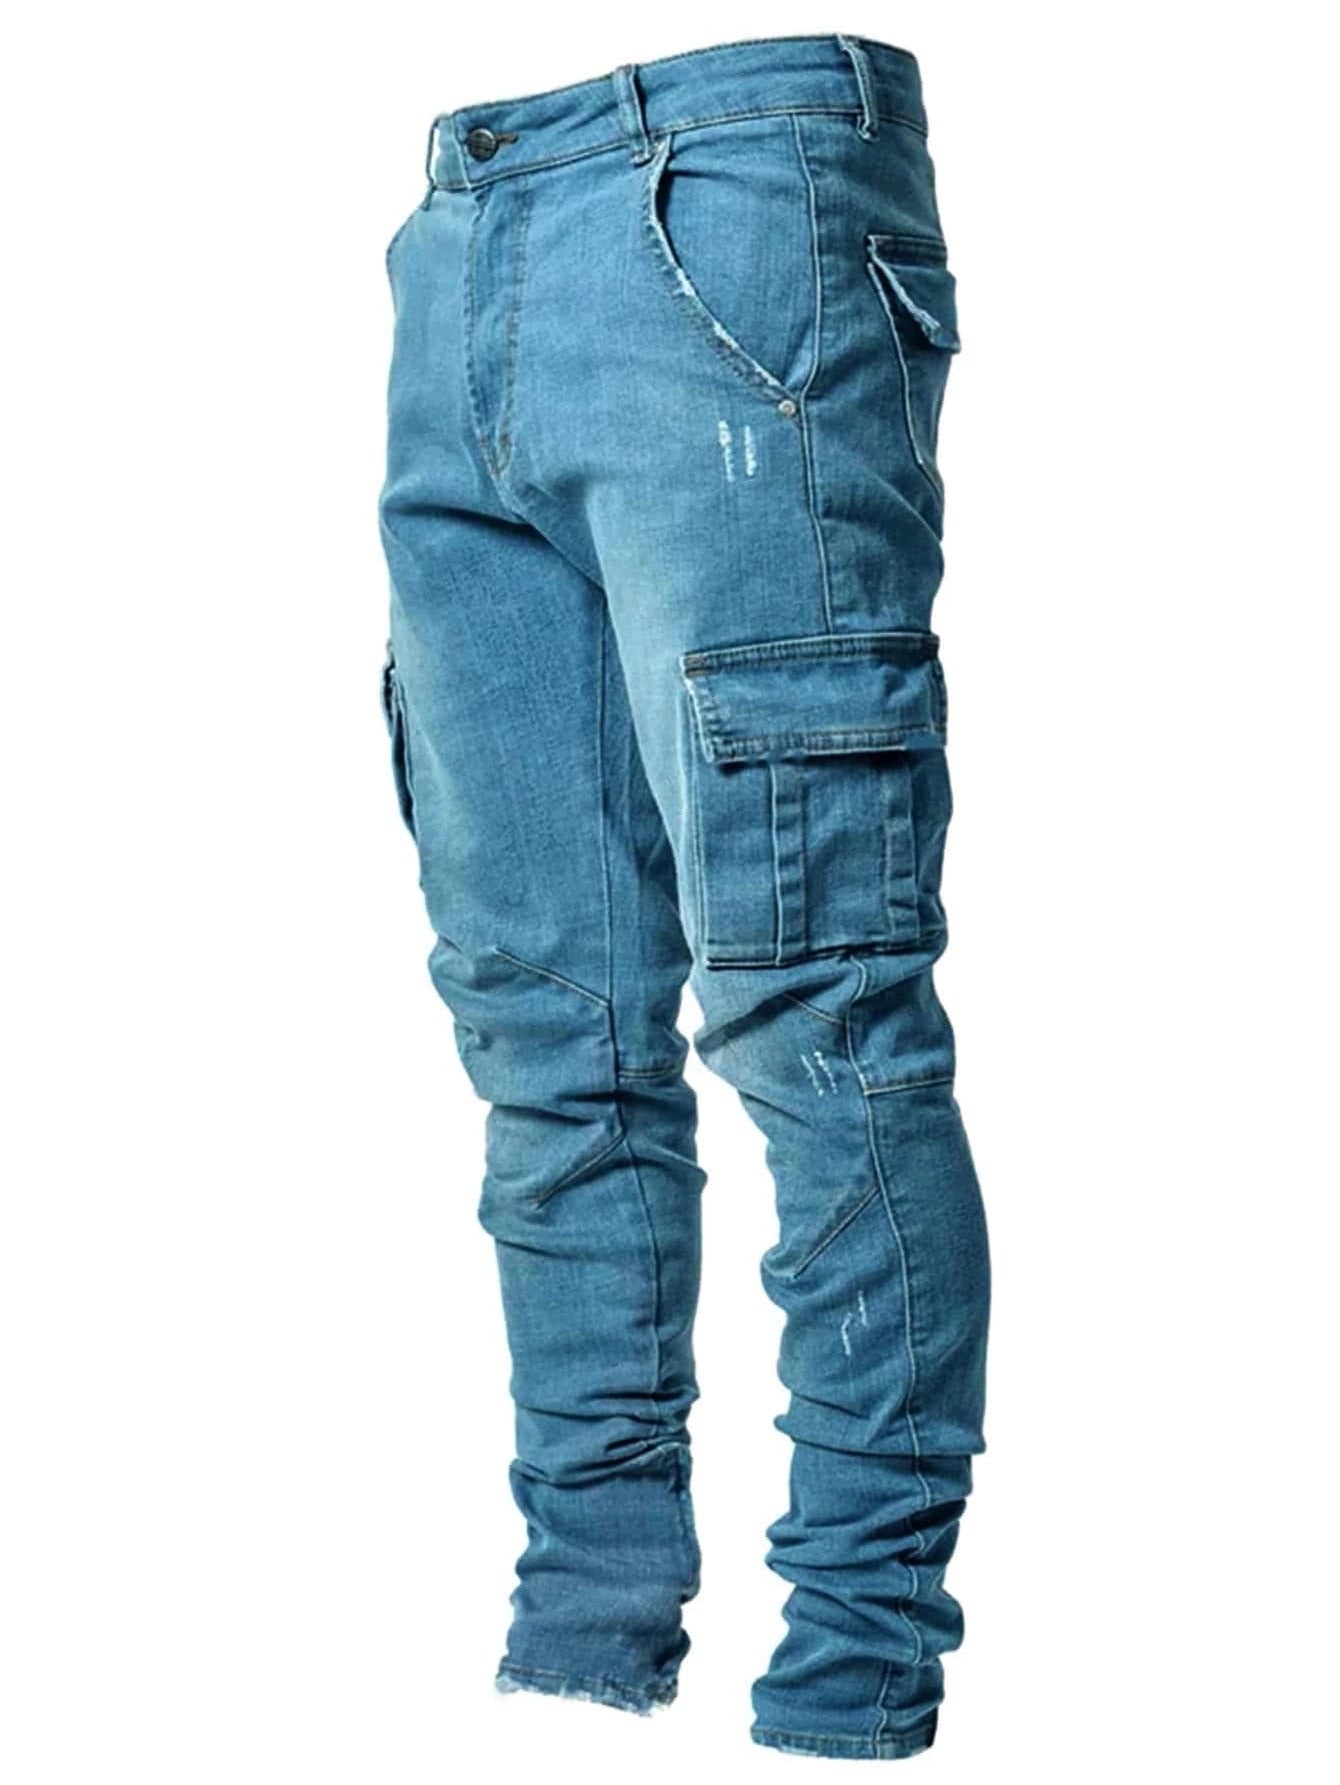 Newest Europe Jeans Men Pencil  Pants Casual Cotton Denim Ripped Distressed Hole New Fashion Pants Side Pockets Cargo - Bekro's ART